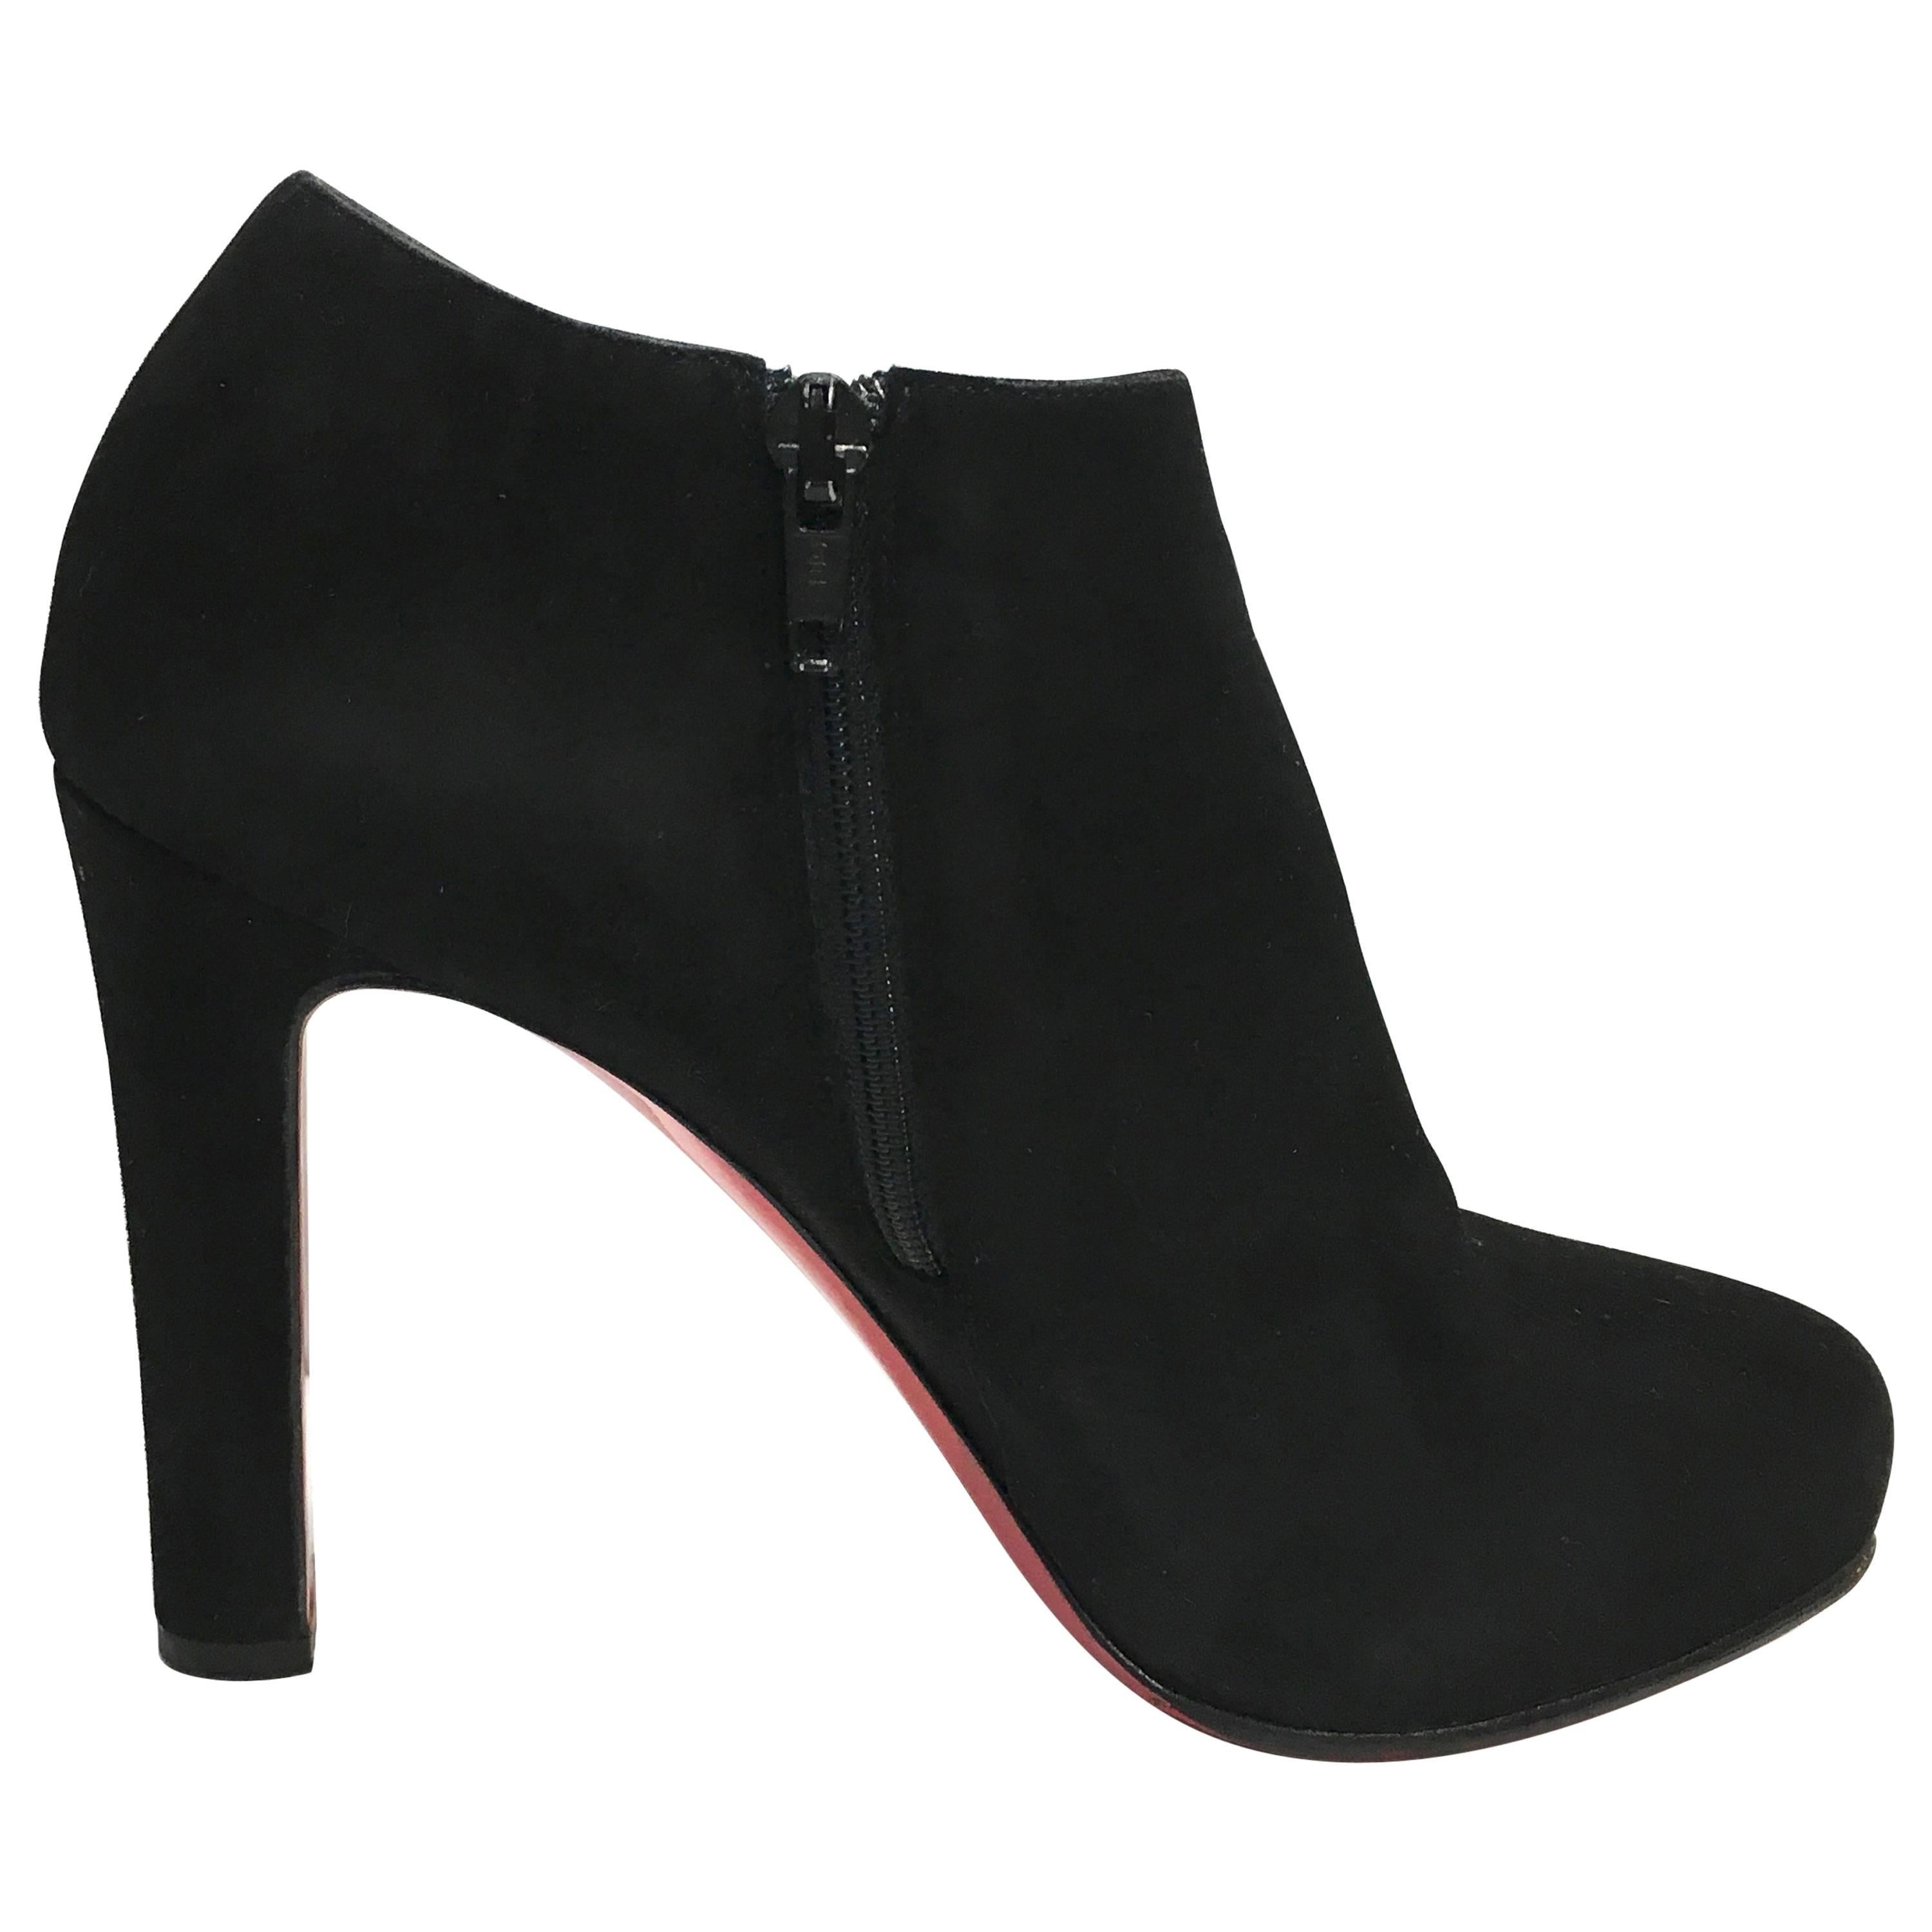 CHRISTIAN LOUBOUTIN Vicky Booty 120 Black Suede Red Bottom Ankle Boots 37.5